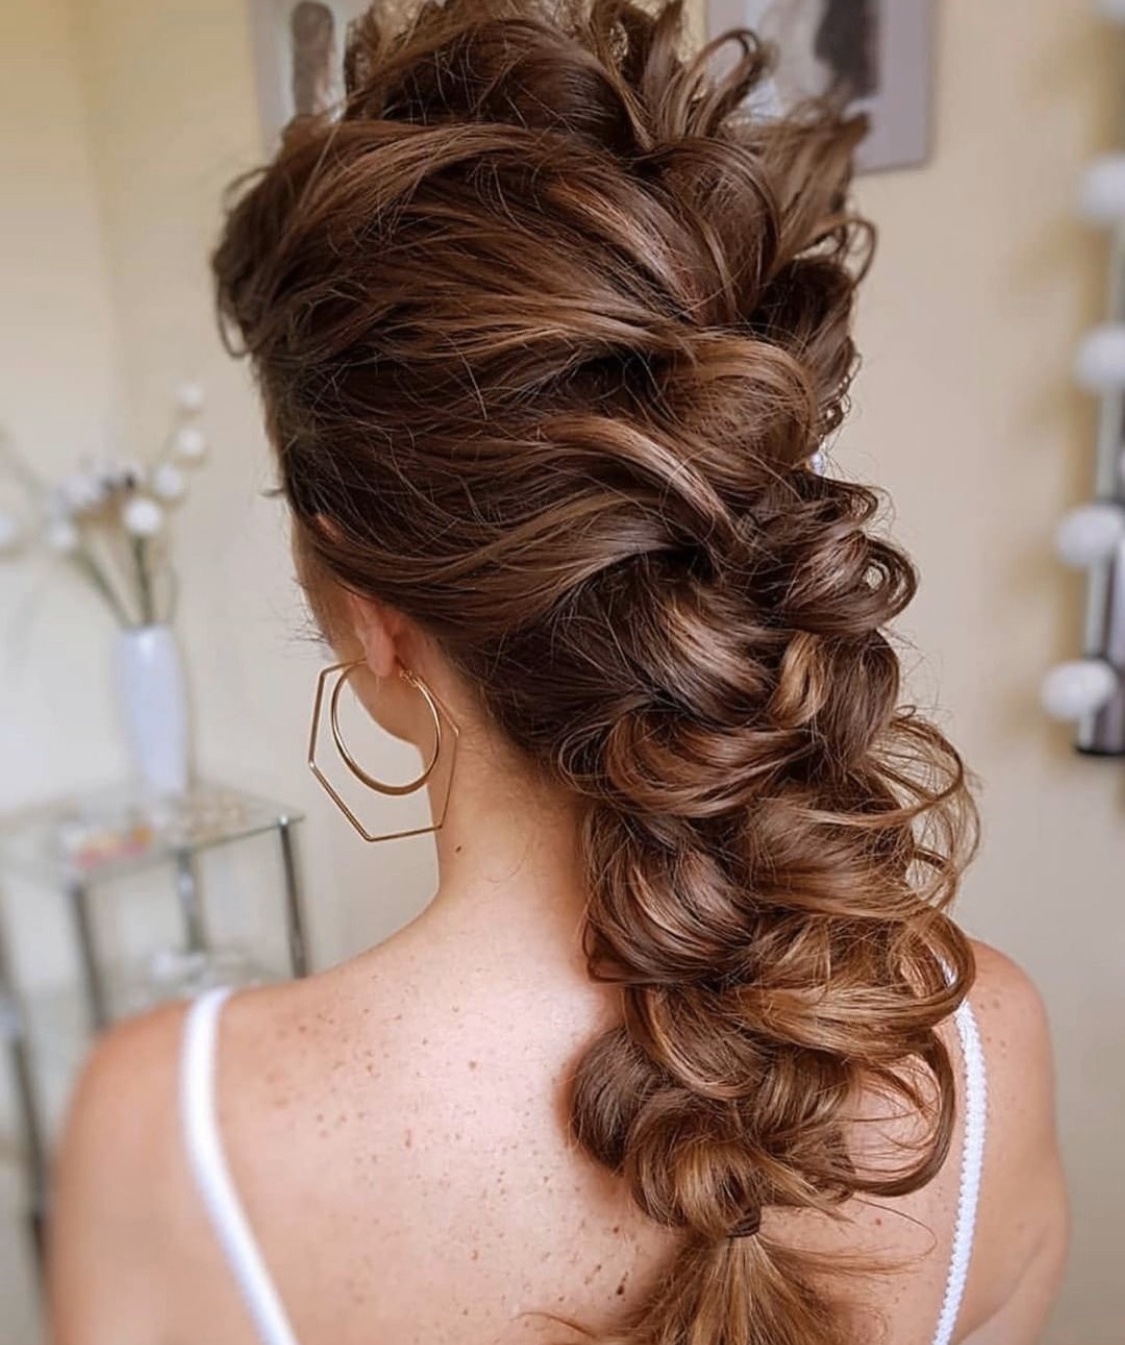 Party Hairstyles, Paisley Hair Salon